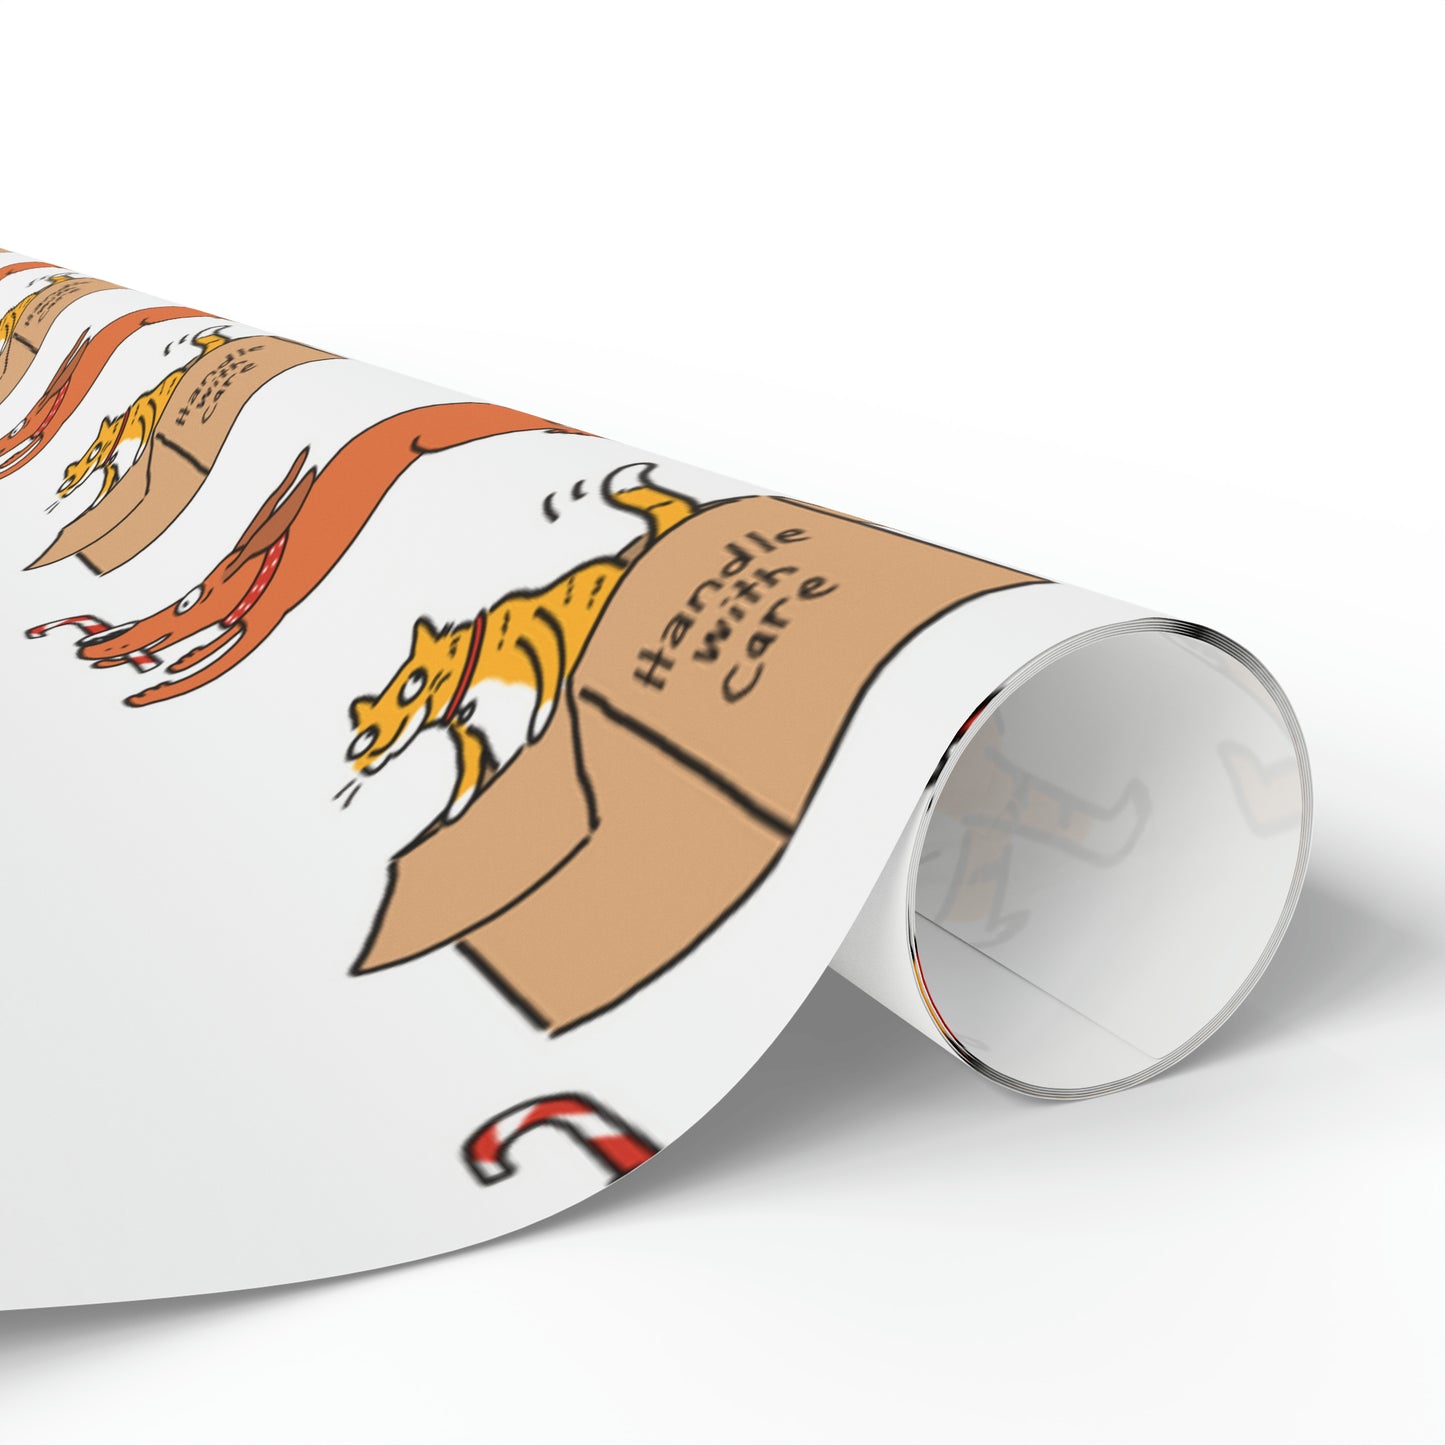 Rhymes With Orange "Holiday Cats And Dogs" Wrapping Paper